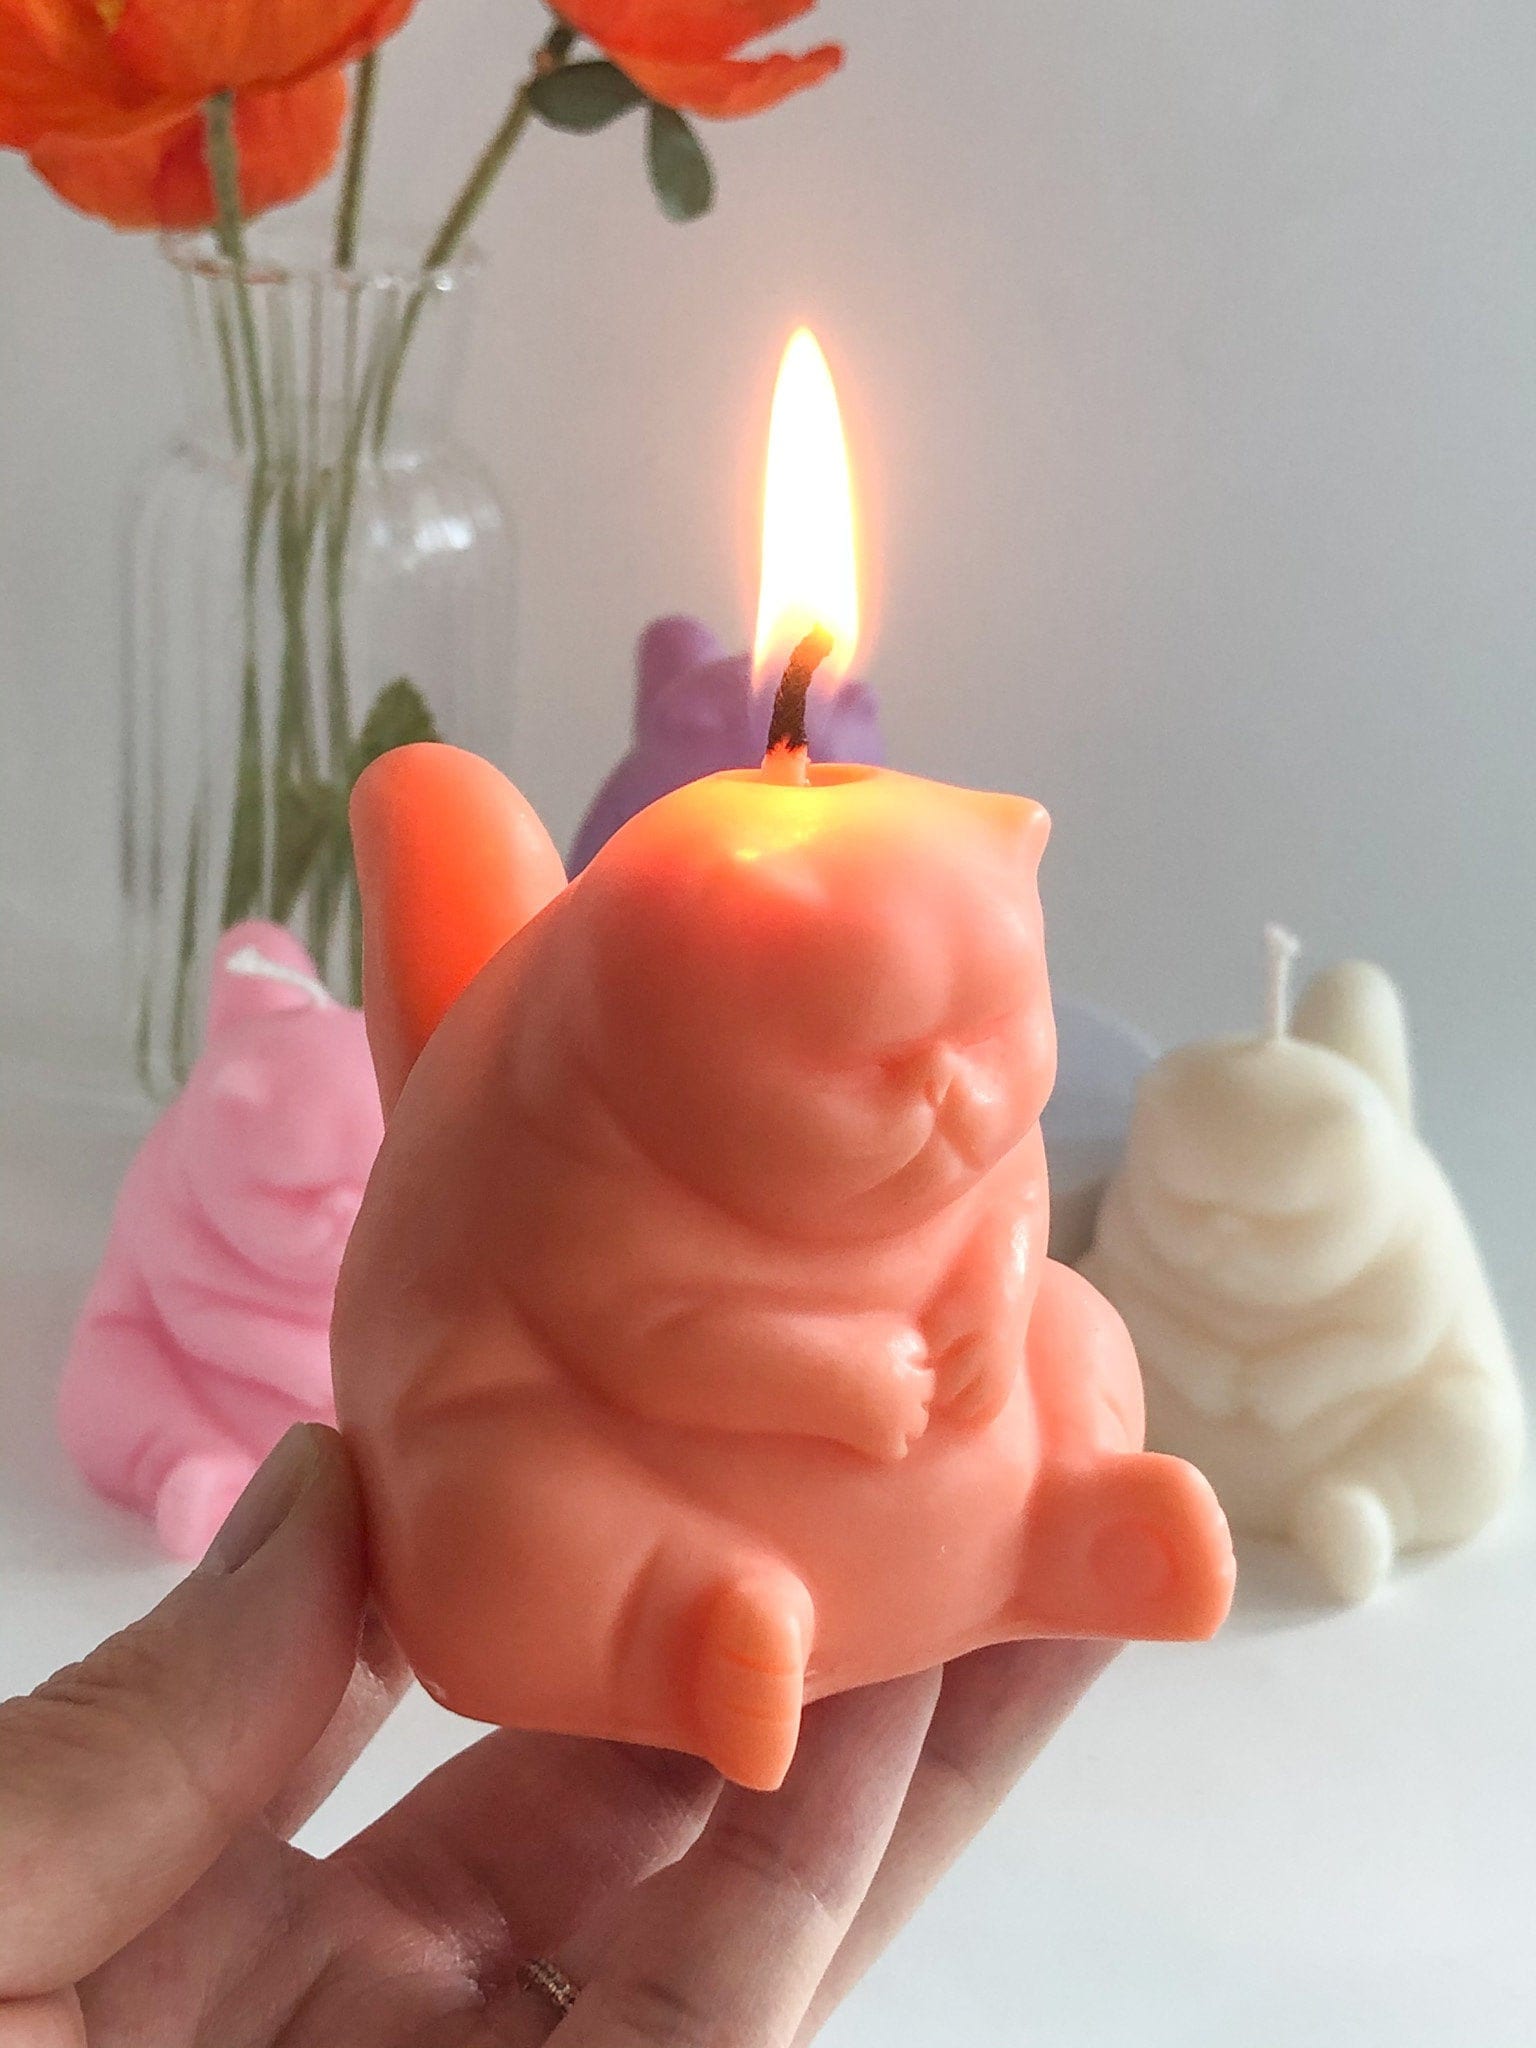 A melting wax candle with a grumpy figure; cartoon style